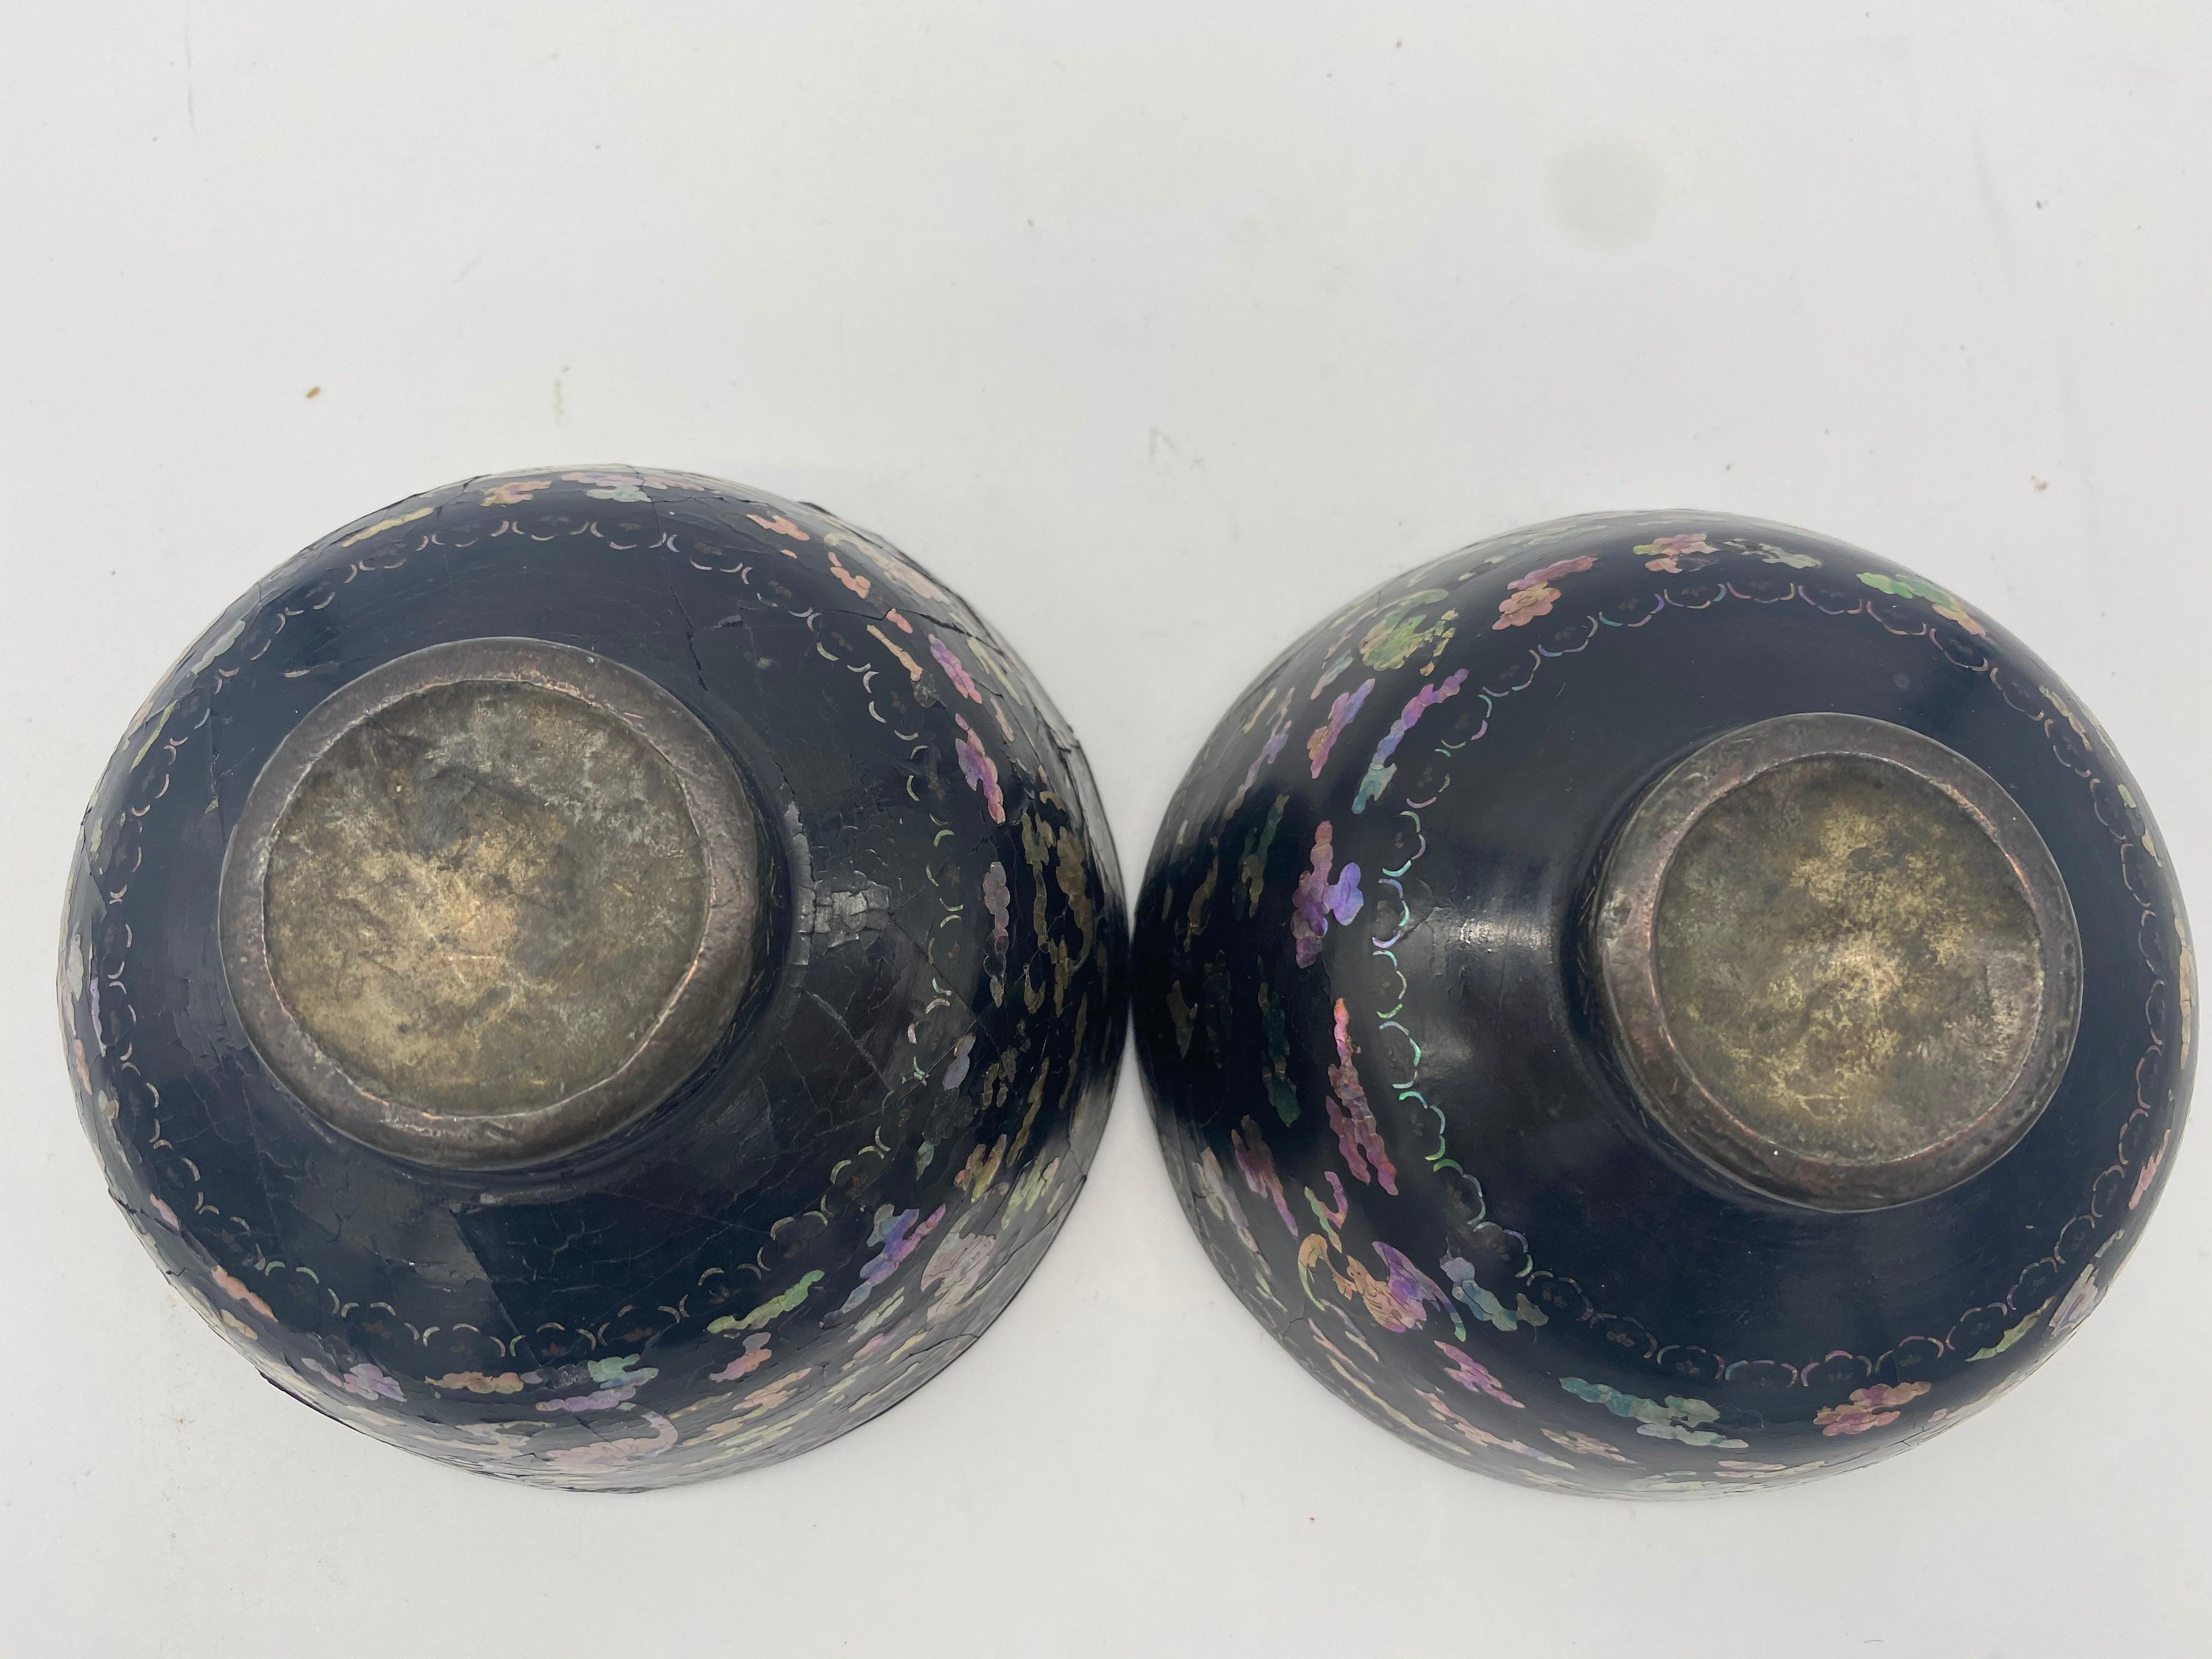 18th Century Pair of Chinese Silver Lacquer Bowls with Mother of Pearl Inlaid In Good Condition For Sale In Brea, CA